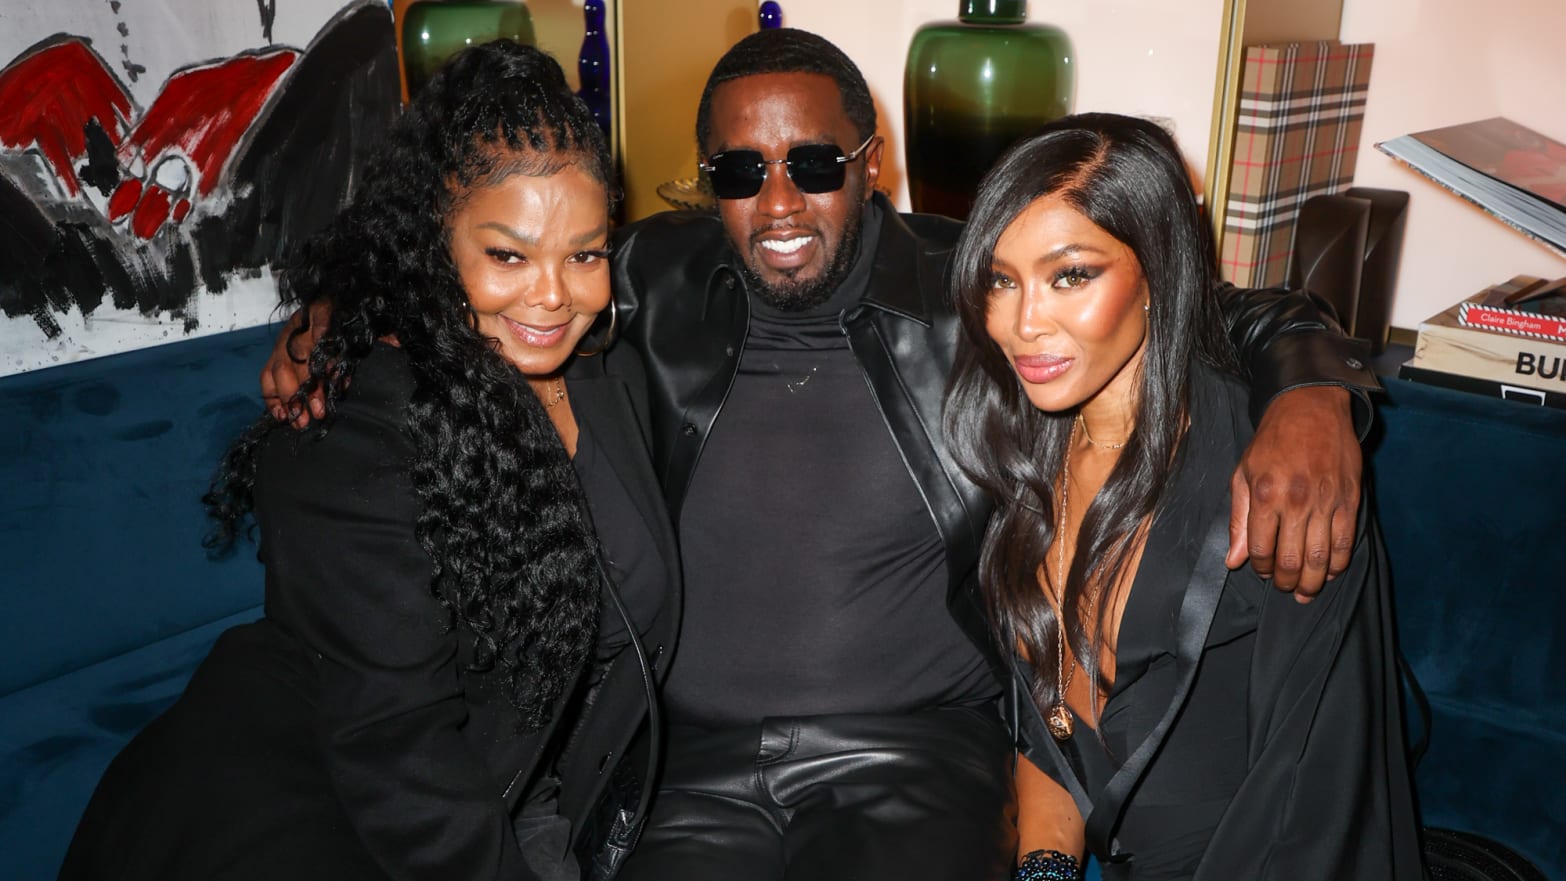 Janet Jackson, Sean Combs aka Diddy and Naomi Campbell.